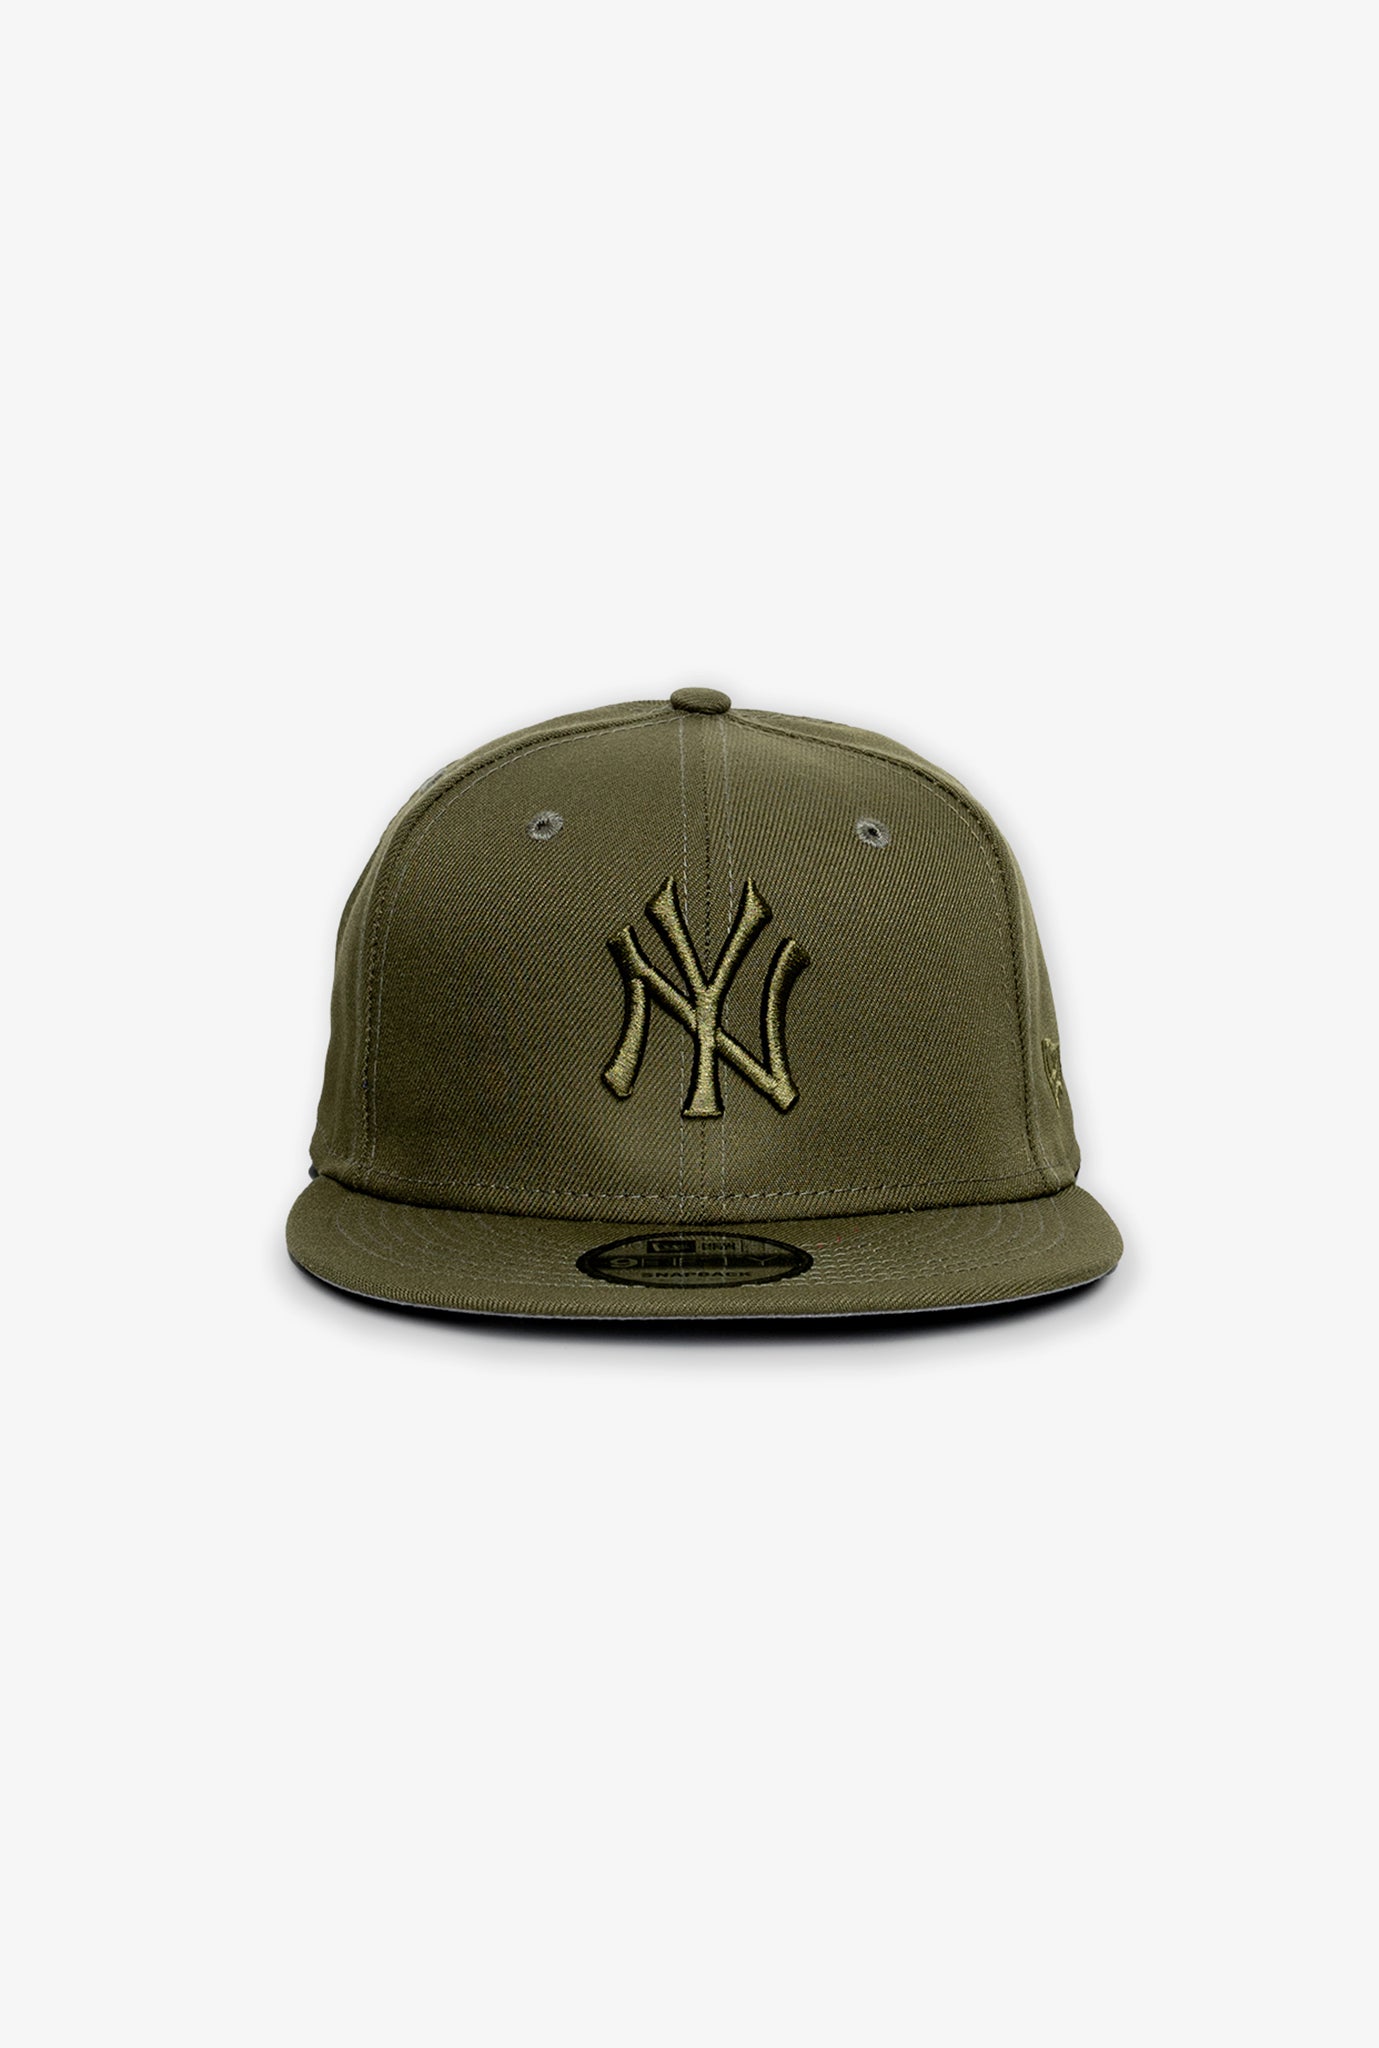 New York Yankees 9FIFTY Color Pack Snapback - Olive Green